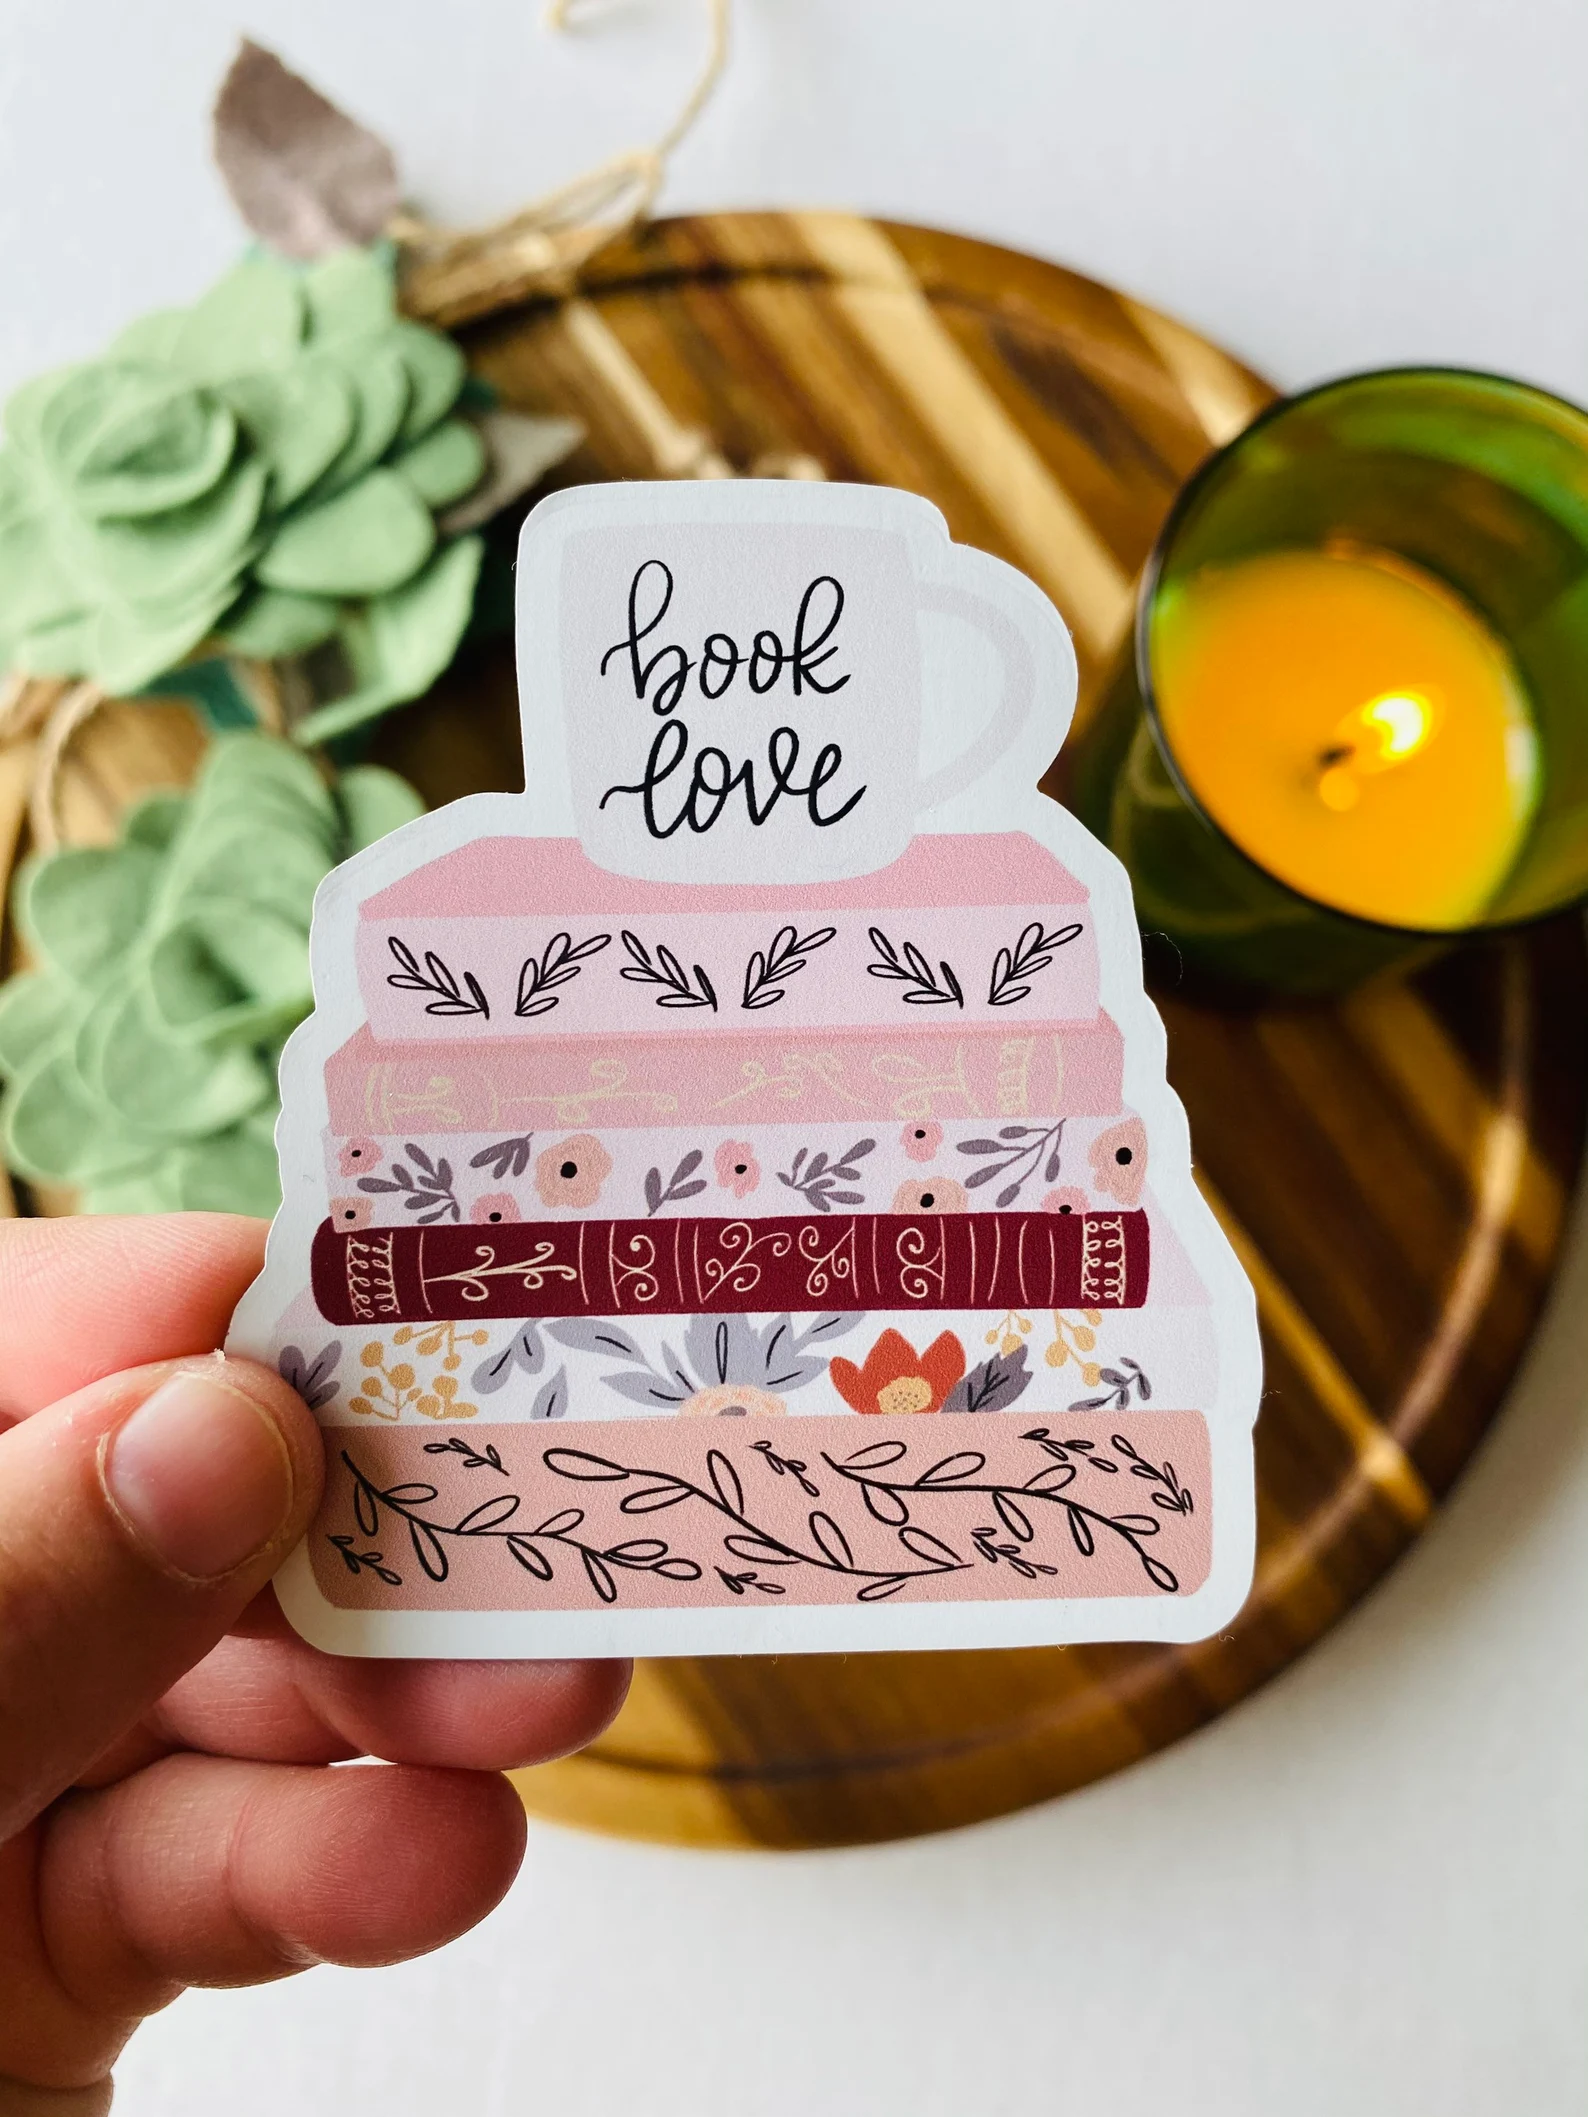 A vinyl sticker that depicts a stack of pink books with a mug that says "book love"